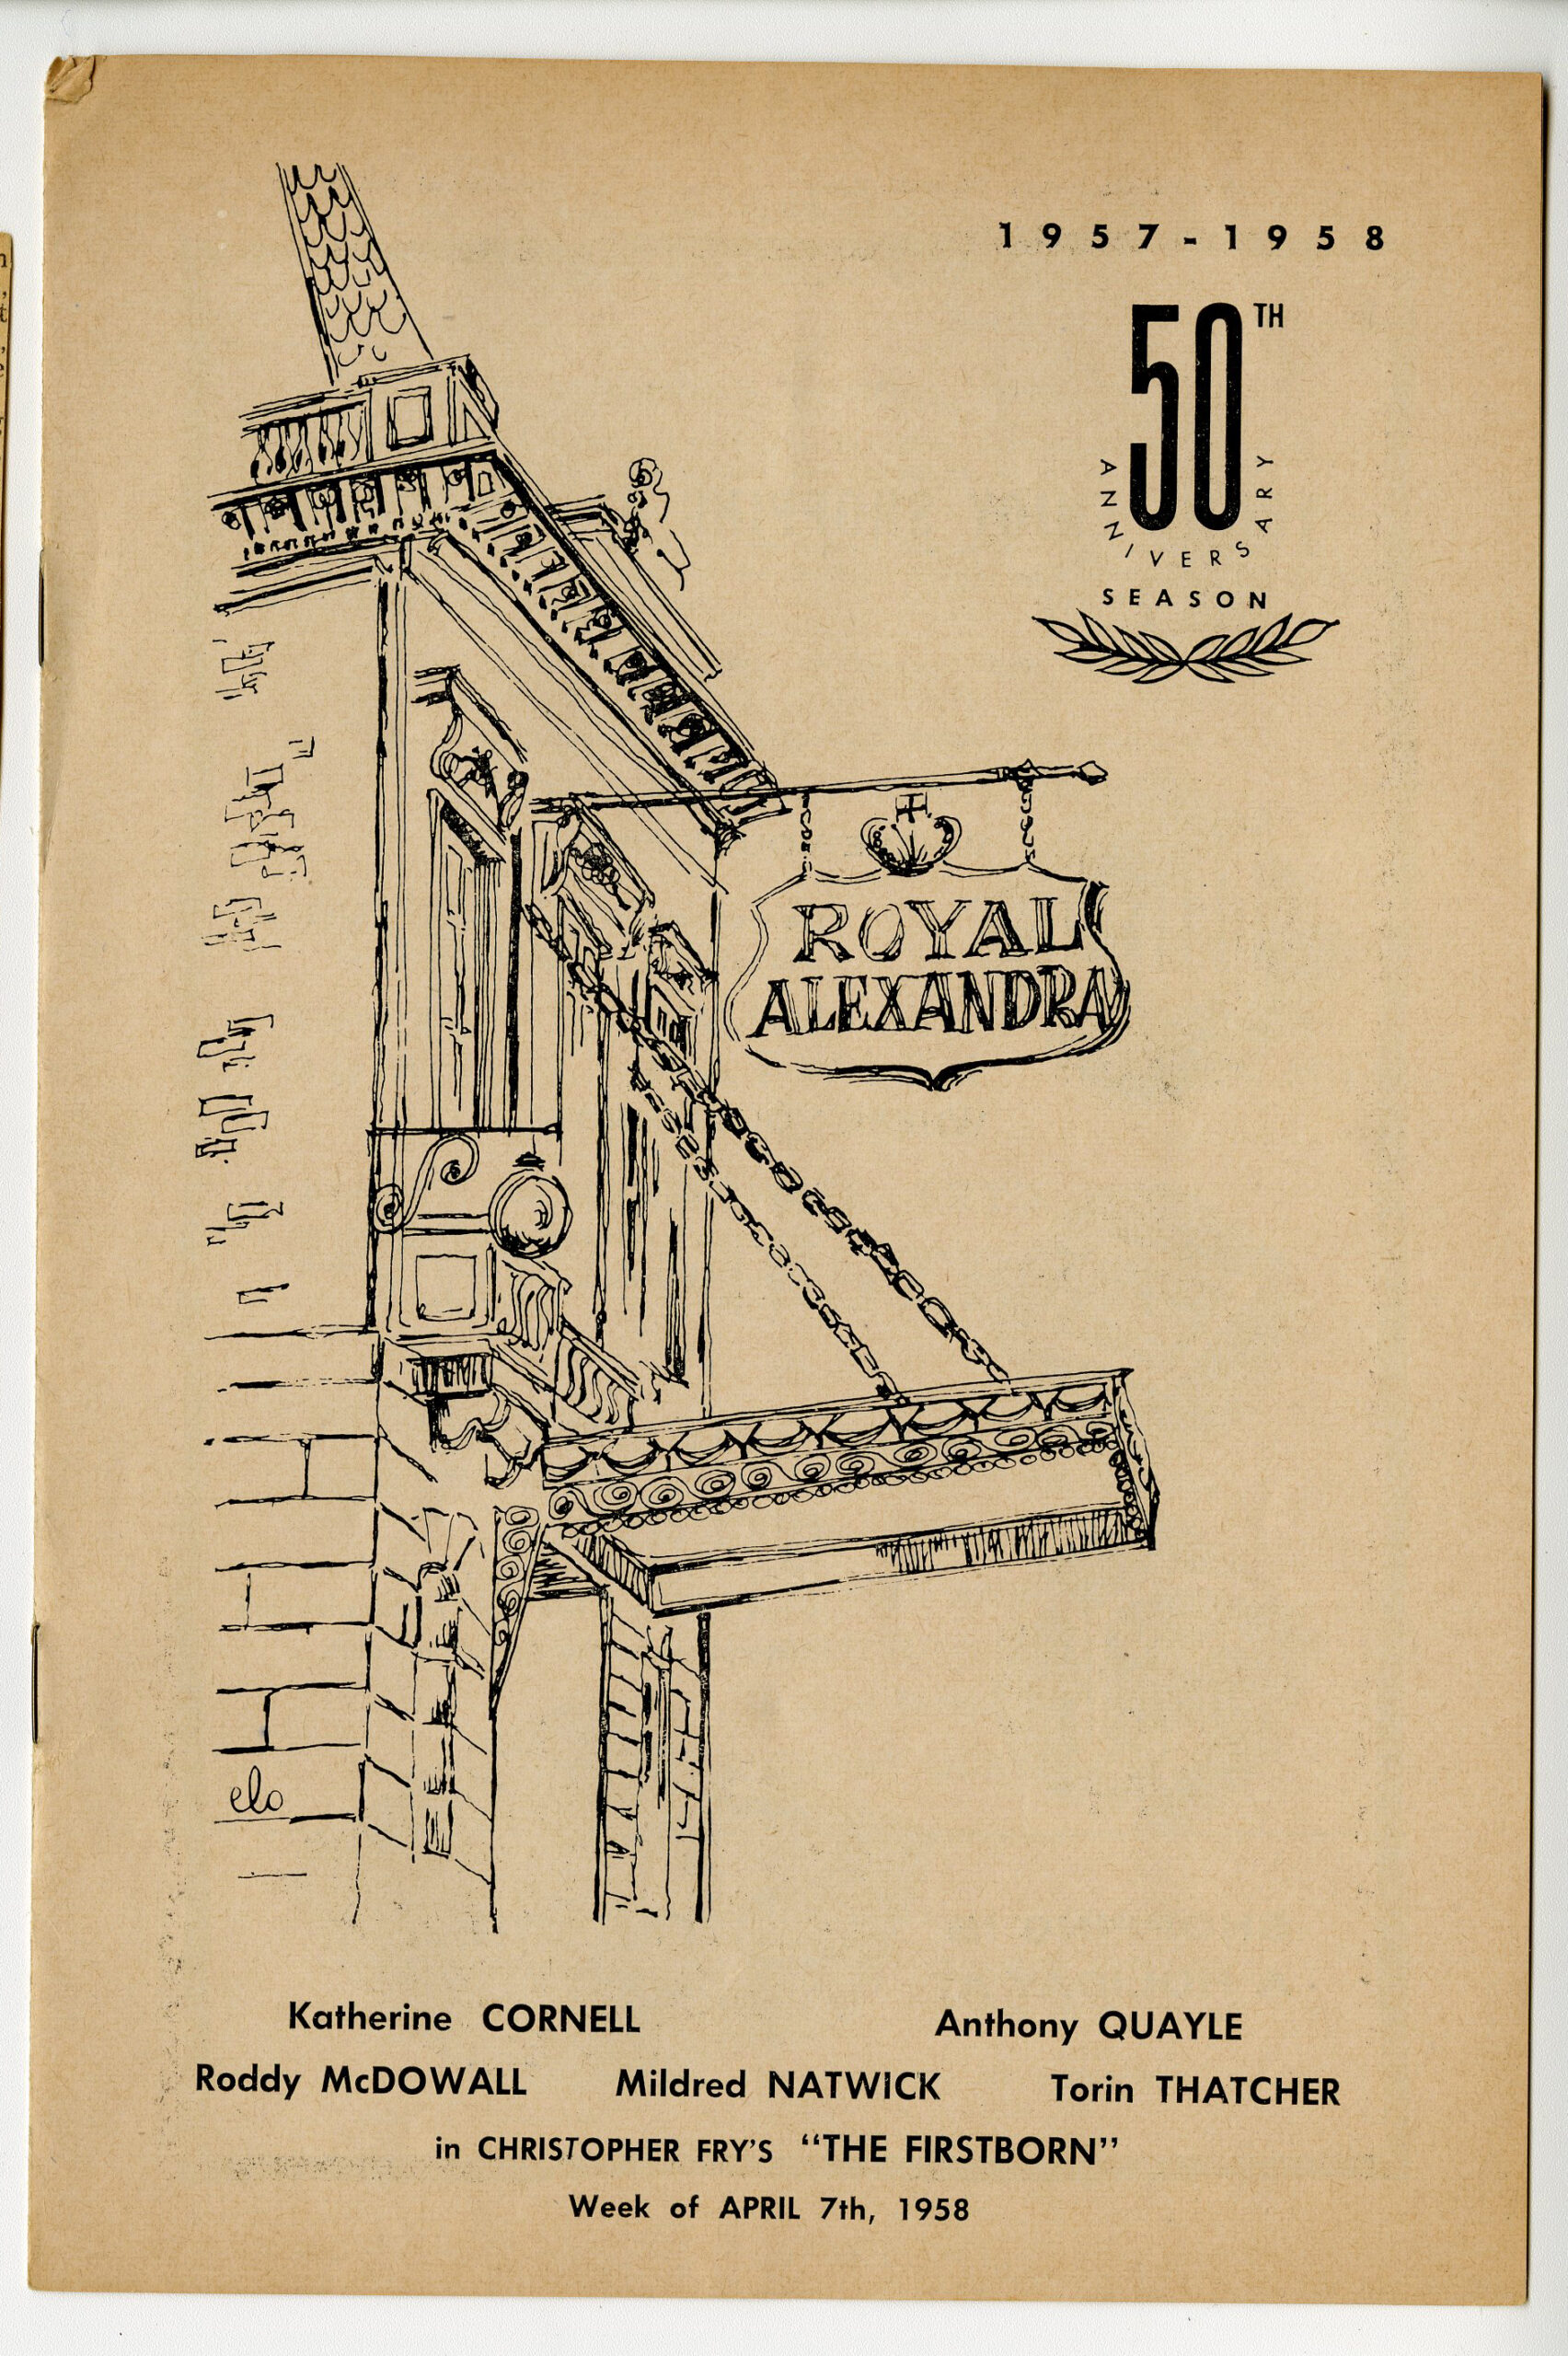 A white programme for a play called The Firstborn at the Royal Alexandra Theatre, with a caricature of the theatre on the front.